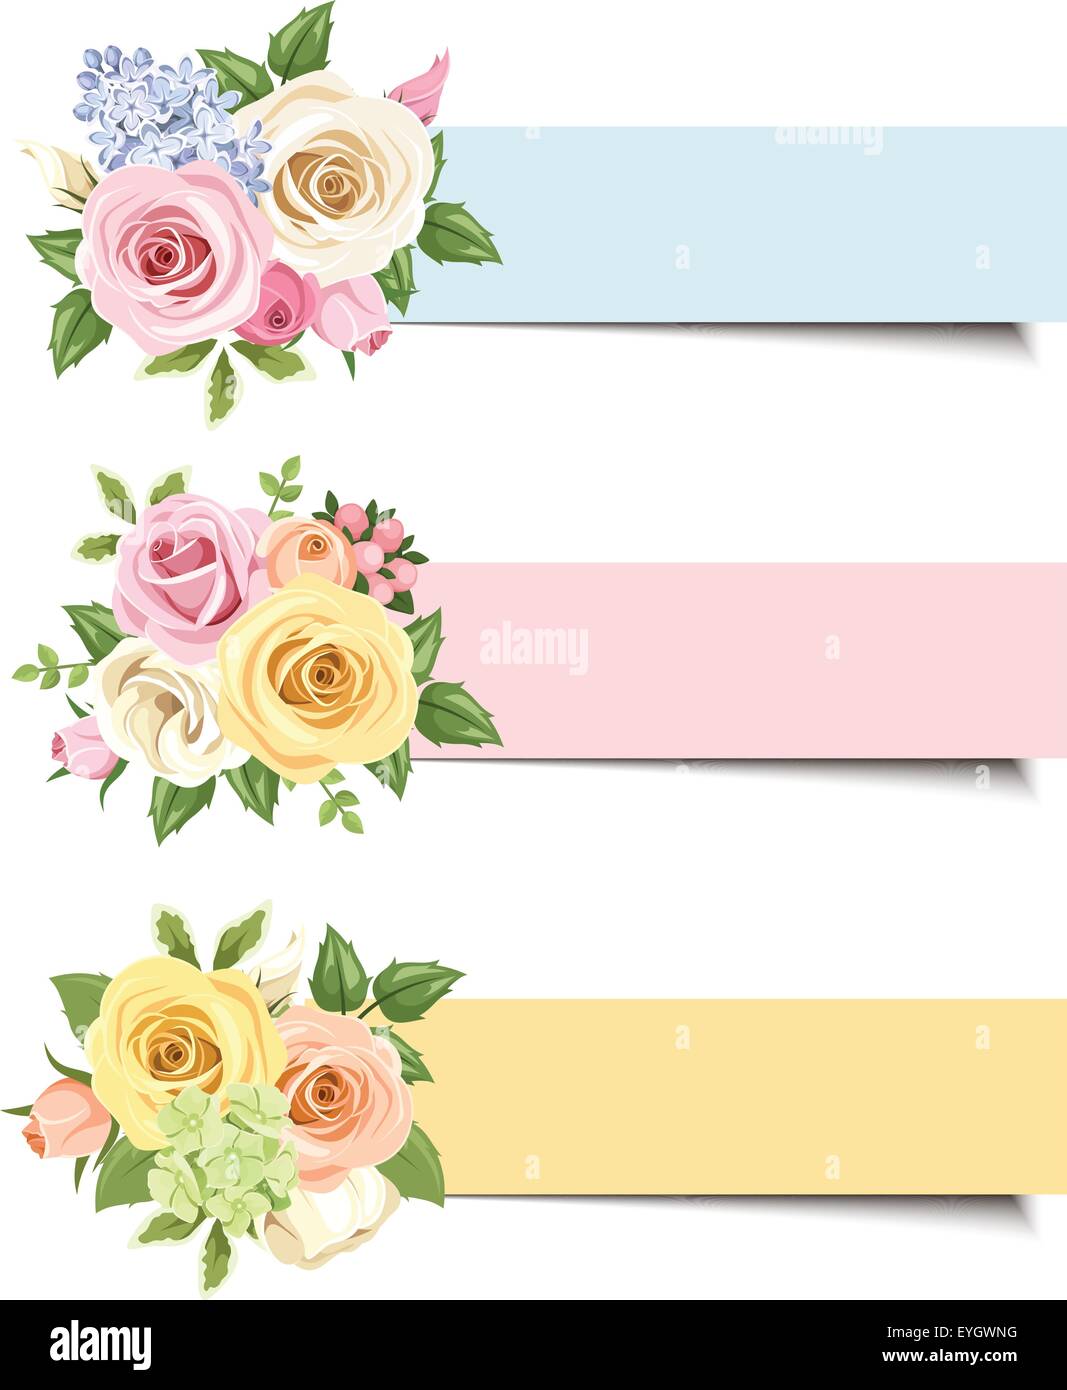 Vector banners with colorful roses and lisianthus flowers. Stock Vector